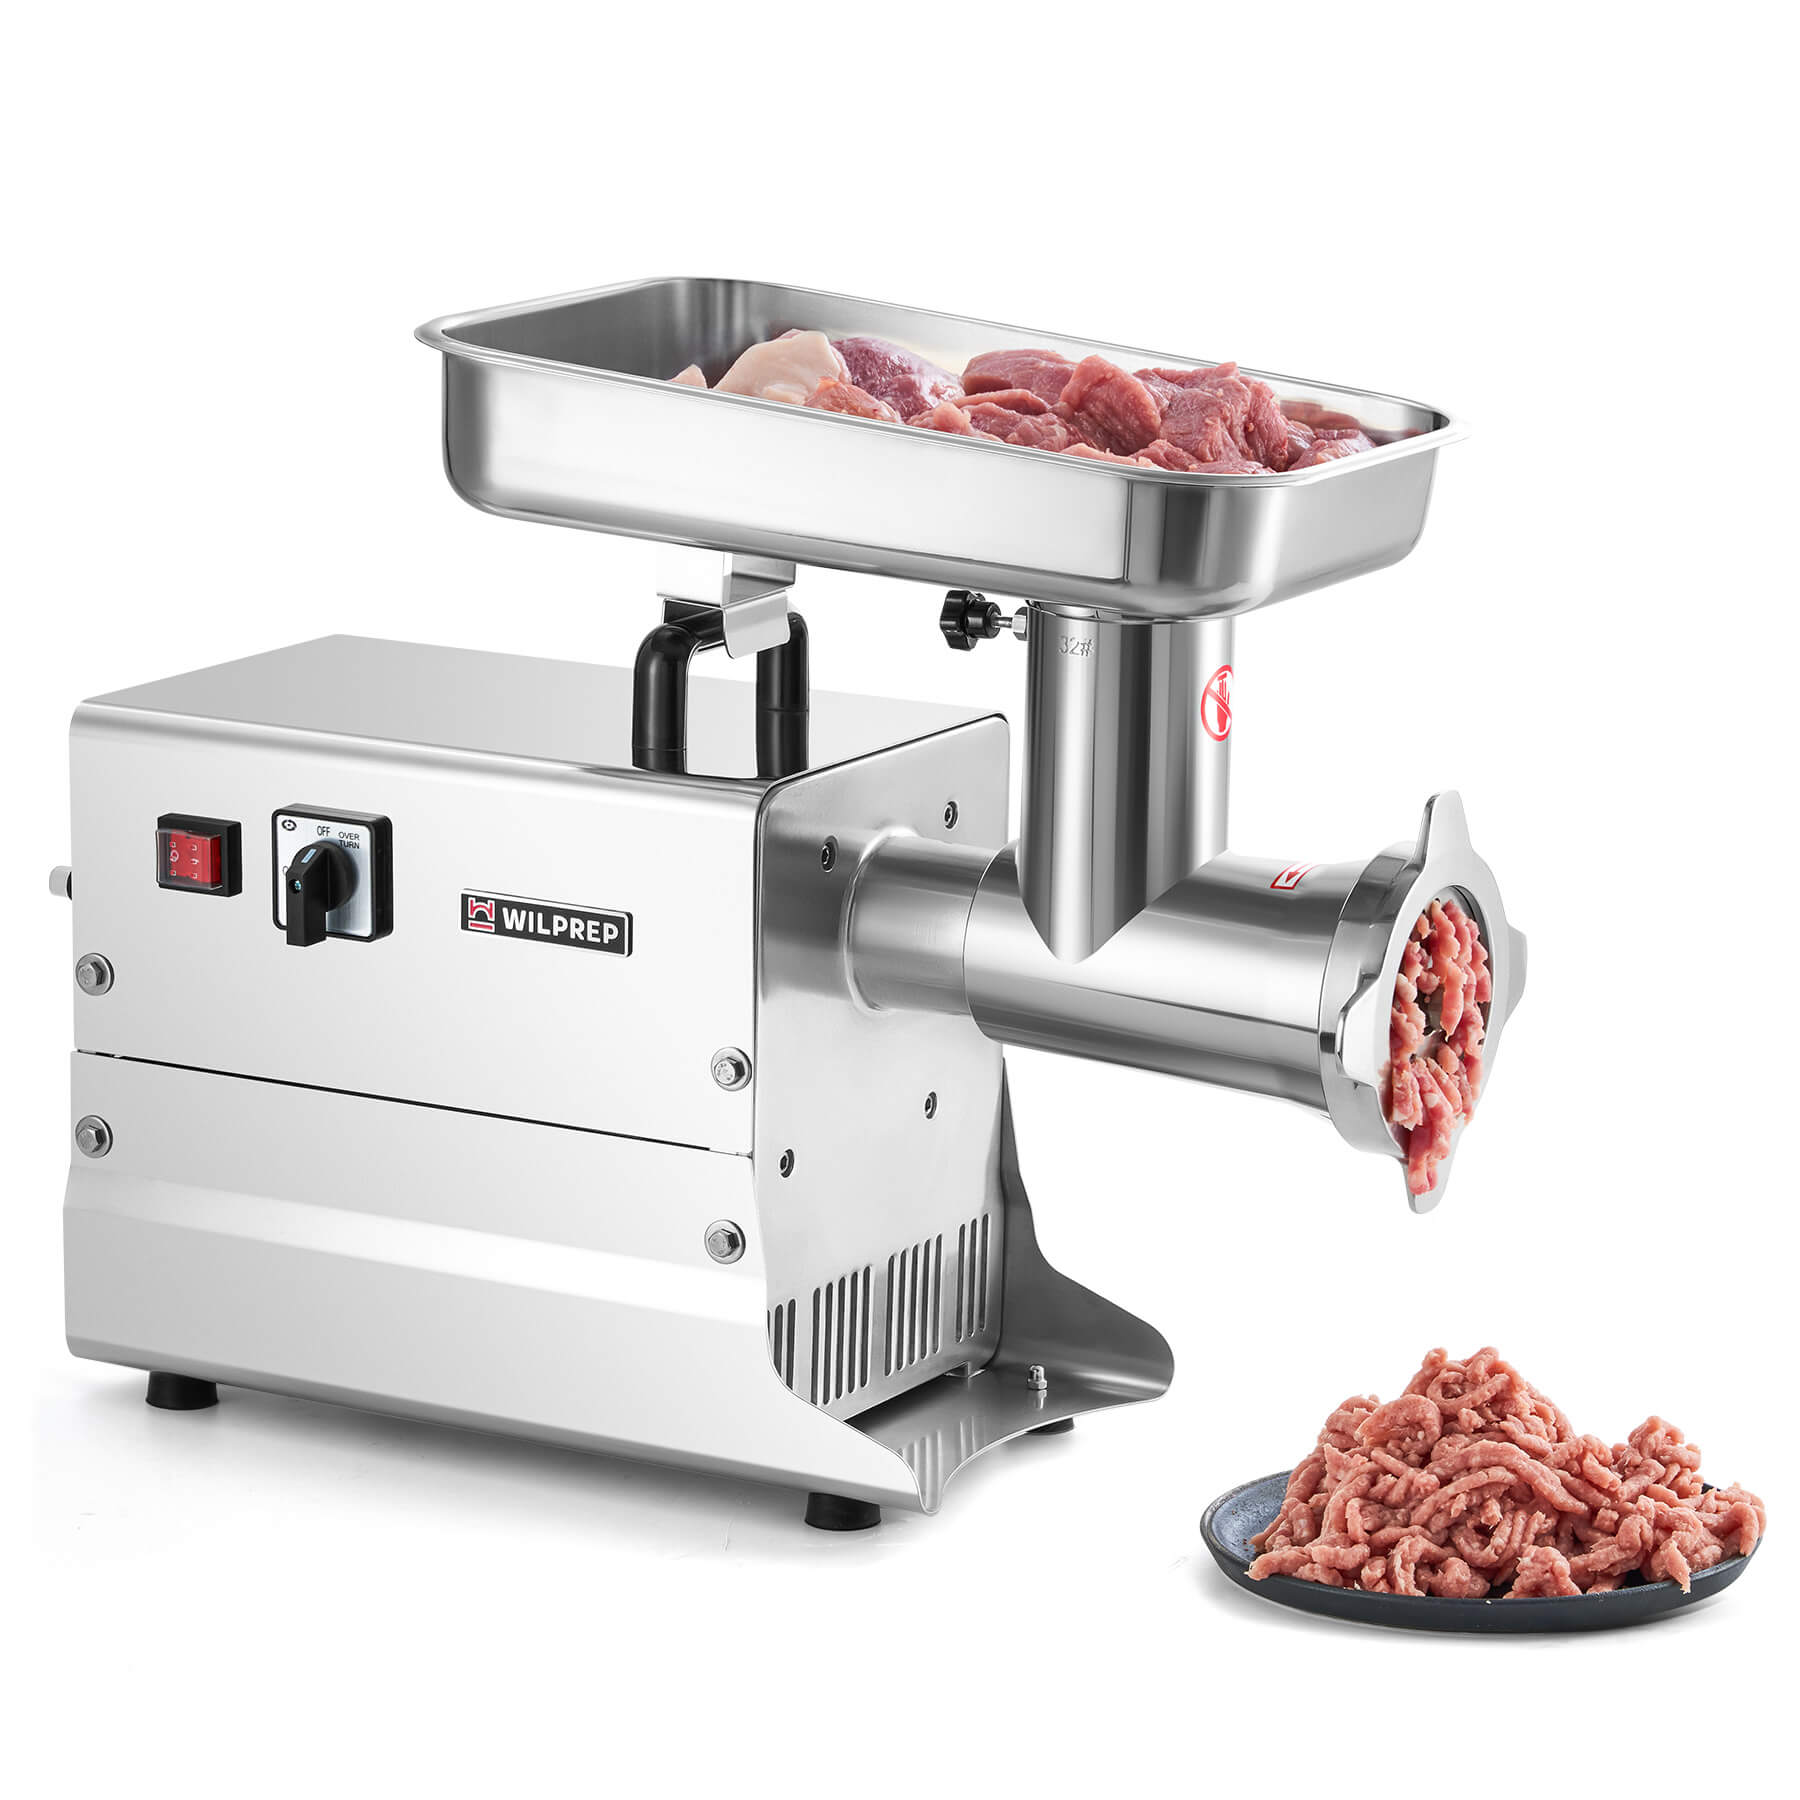 1500W Electric Meat Grinder with Reverse Function ETL Approved-110V,2hp